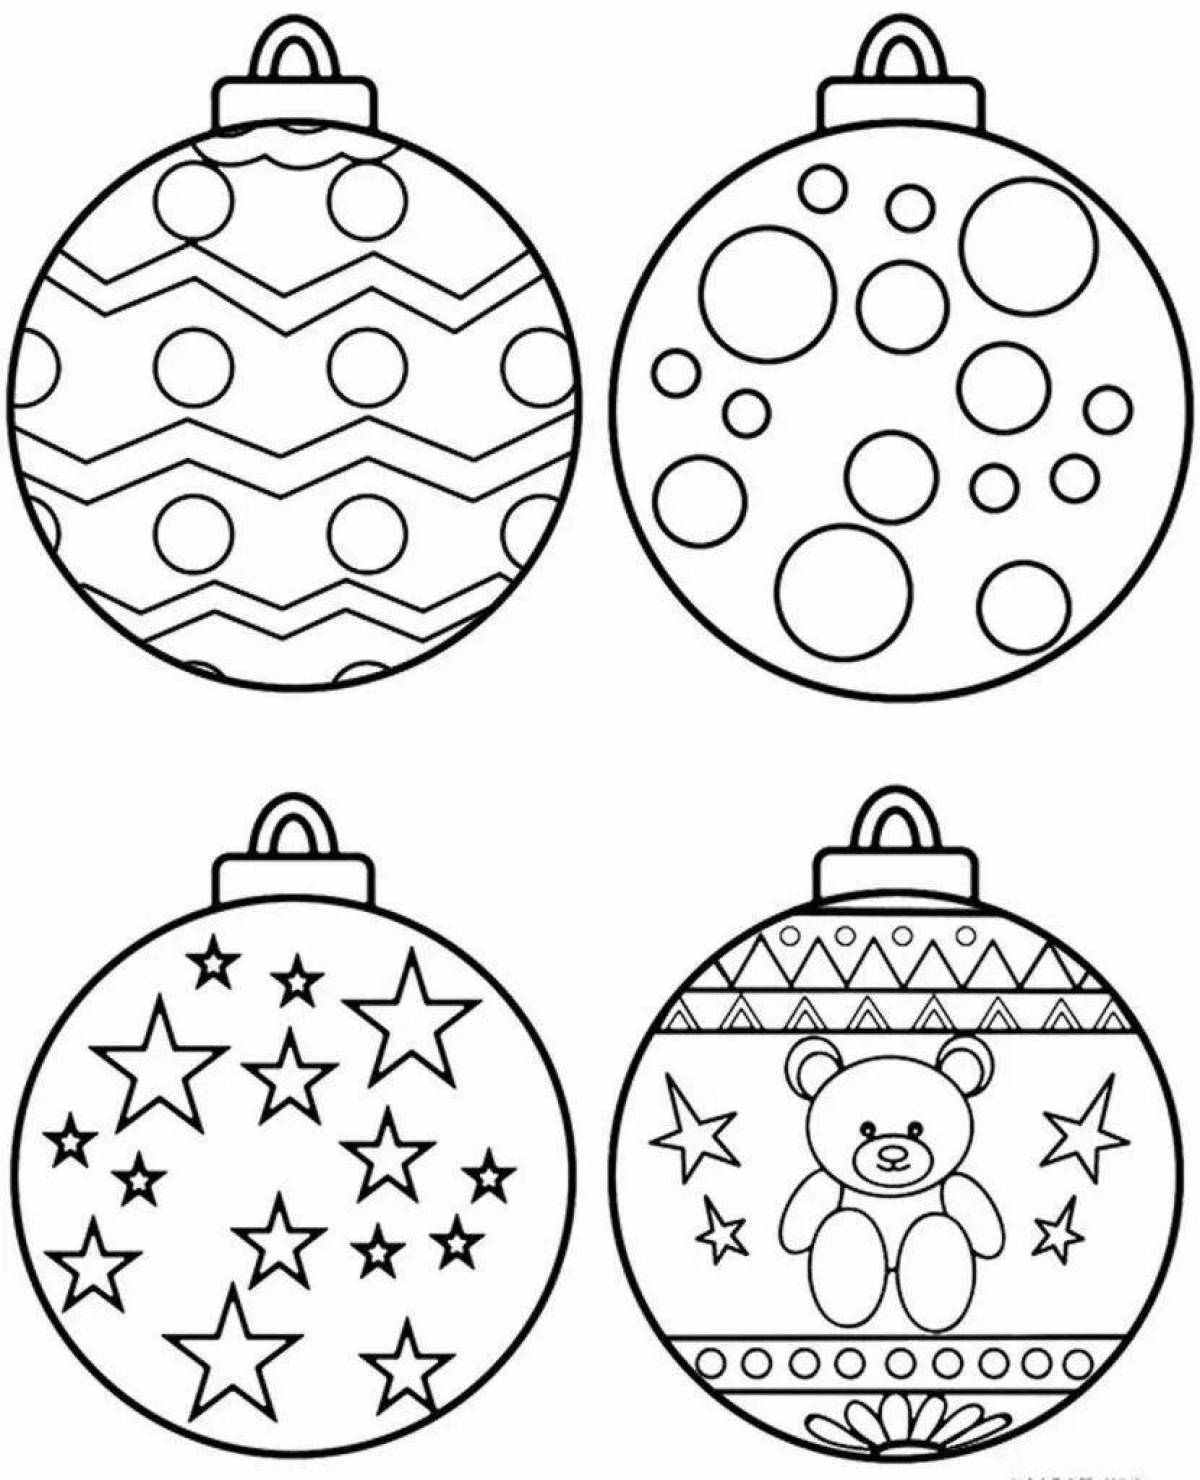 Colorful Christmas decorations coloring pages